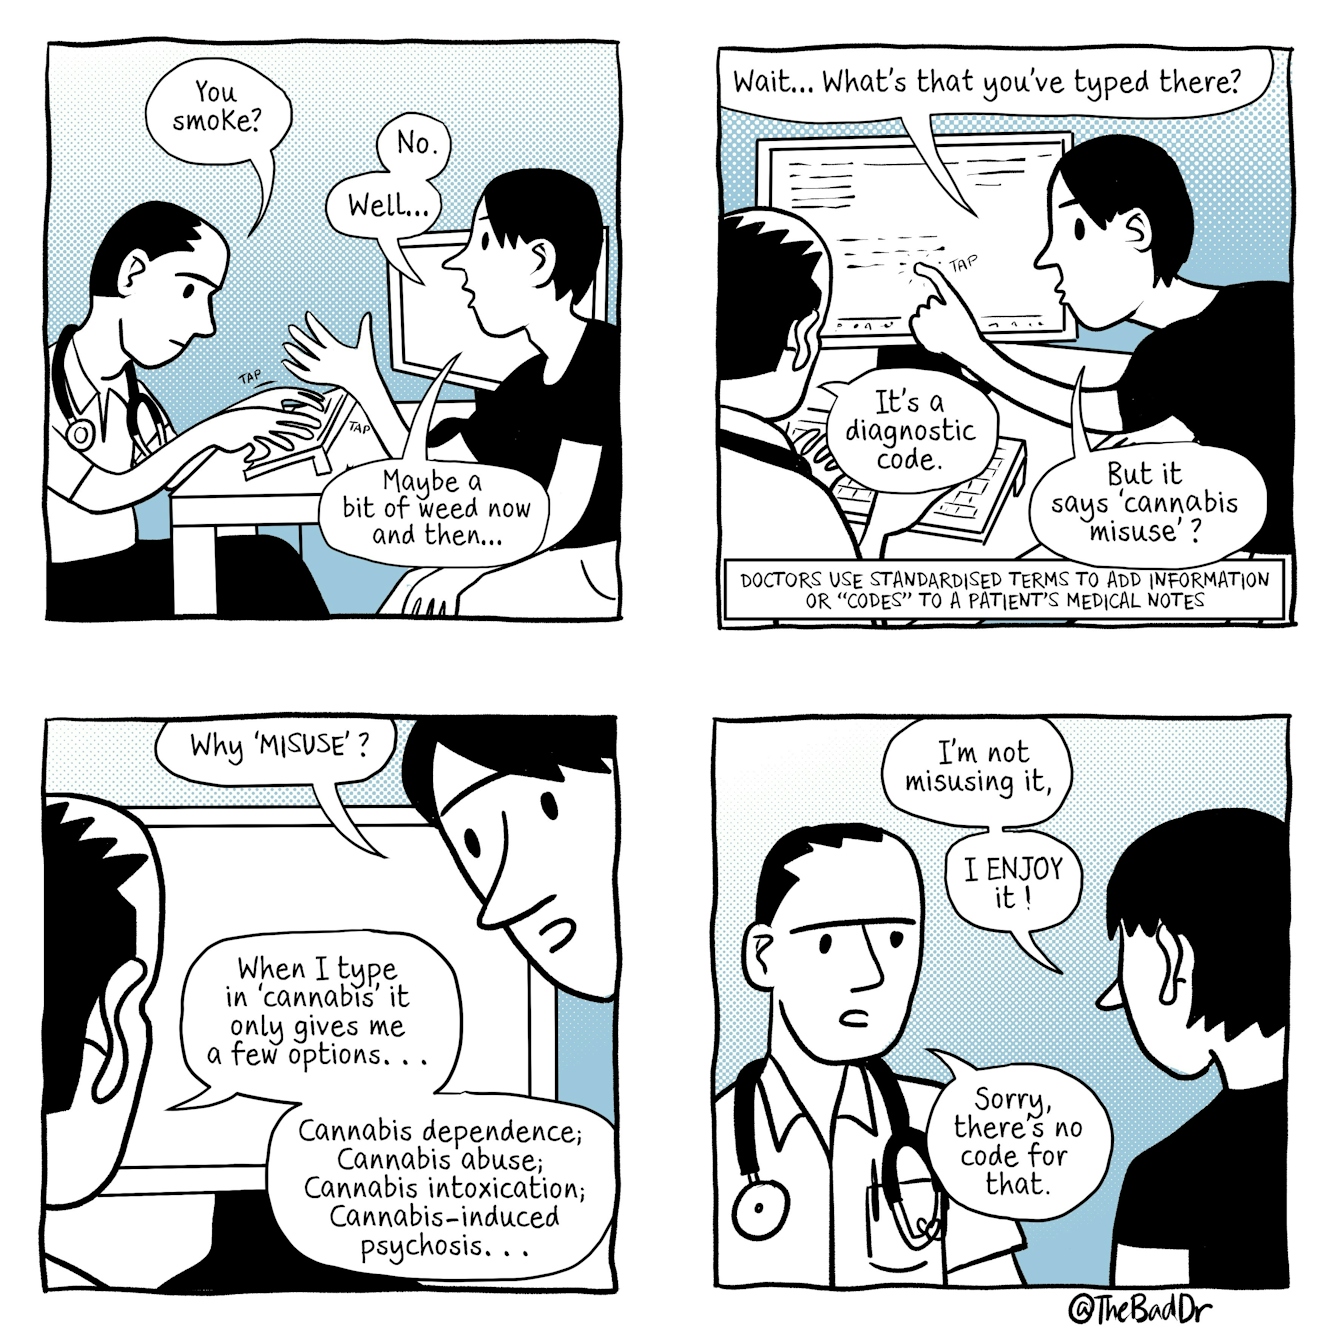 A four panel comic. 

The first panel shows a young man speaking to a male doctor, who is typing. A speech bubble comes from the doctor and reads, 'You smoke?'. The young man is gesturing with his right hand. Speech from him reads 'No. Well... Maybe a bit of weed now and then...' 

In the second panel, the doctor continues to type whilst staring at his computer. Text reads, 'Doctors use standardised terms to add information or "codes" to a patients medical notes '. The young man, looking alarmed, taps the doctor's computer screen. Speech from him reads 'Wait... what's that you've typed there?' The doctor replies 'It's a diagnostic code.' The young man says 'But it says 'cannabis misuse'?' 

In the third panel, the young man is looking at the doctor with wide eyes and raised eyebrows, whilst the doctor continues to stare at his computer screen. Speech from the young man reads 'Why 'MISUSE'?'. The doctor replies 'When I type in 'cannabis' it only gives me a few options... Cannabis dependence; Cannabis abuse; Cannabis intoxication; Cannabis-induced psychosis...' 

In the fourth panel, the young man and doctor are stood facing eachother. Speech from the young man reads 'I'm not misusing it, I ENJOY it!'. The doctor replies 'Sorry, there's no code for that.' 